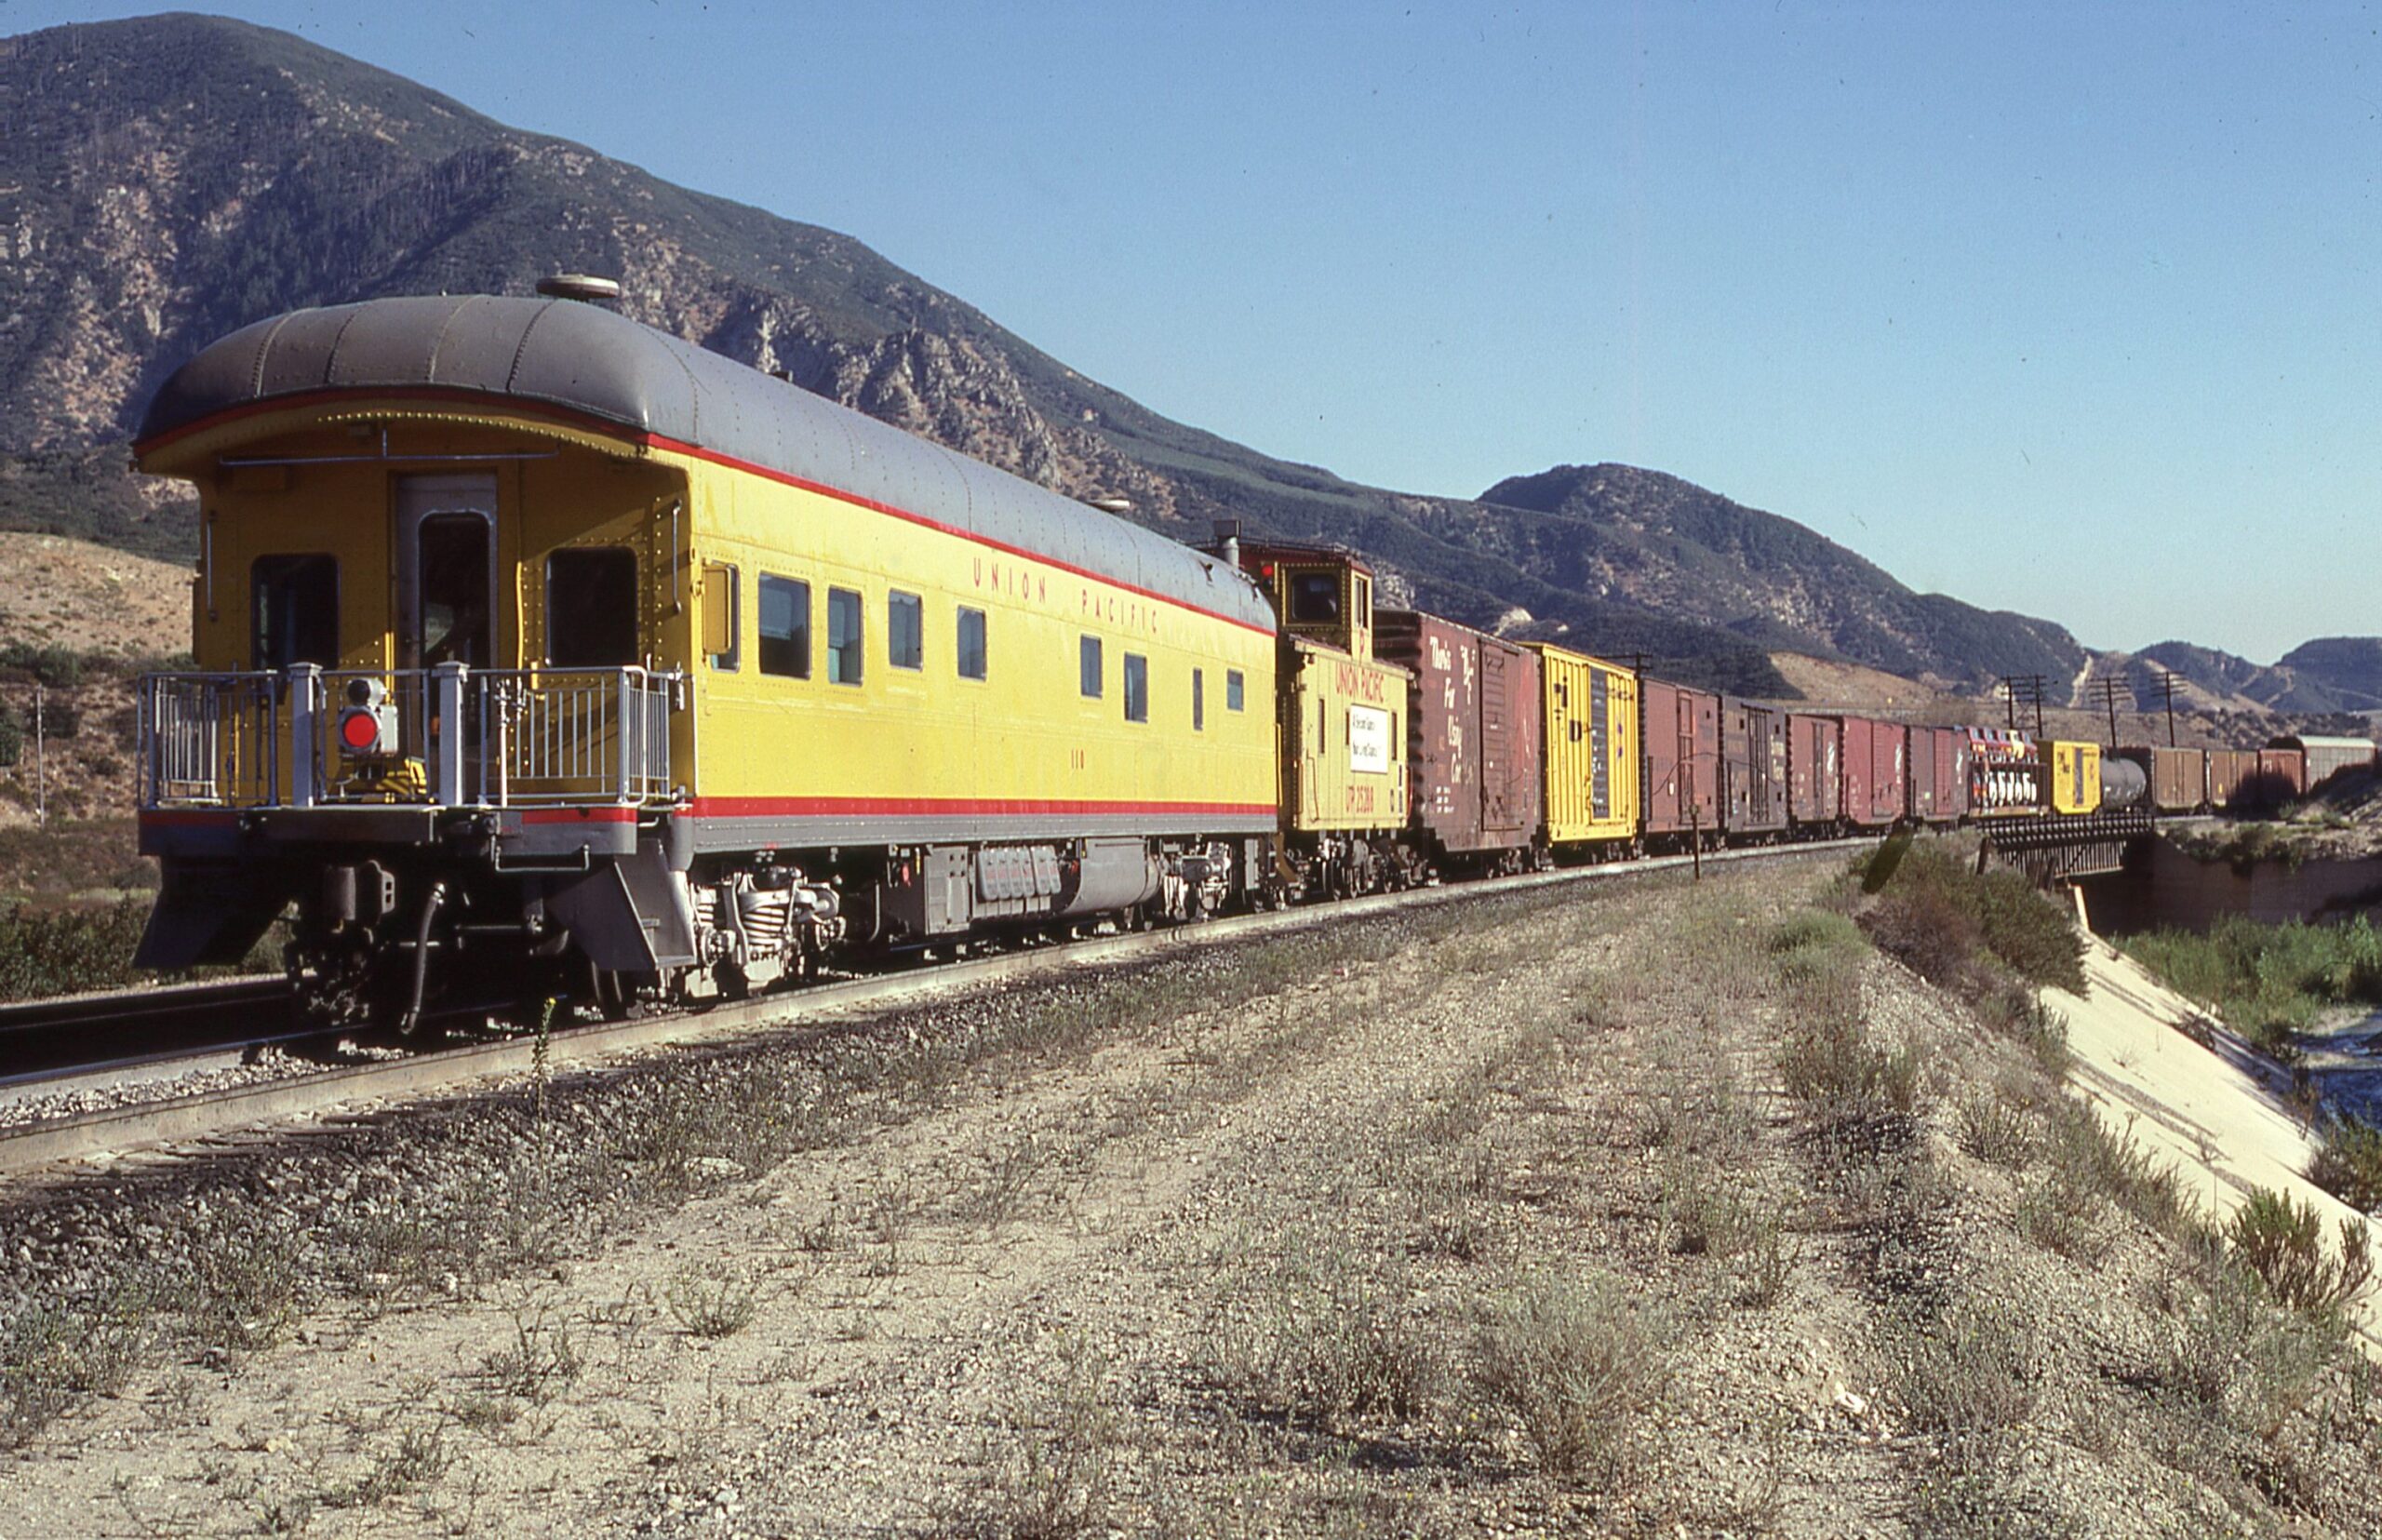 Union Pacific Railroad | Cajon Pass, California | Business Car #110 | on freight train | September 1999 | Robert Dunnet phptograph